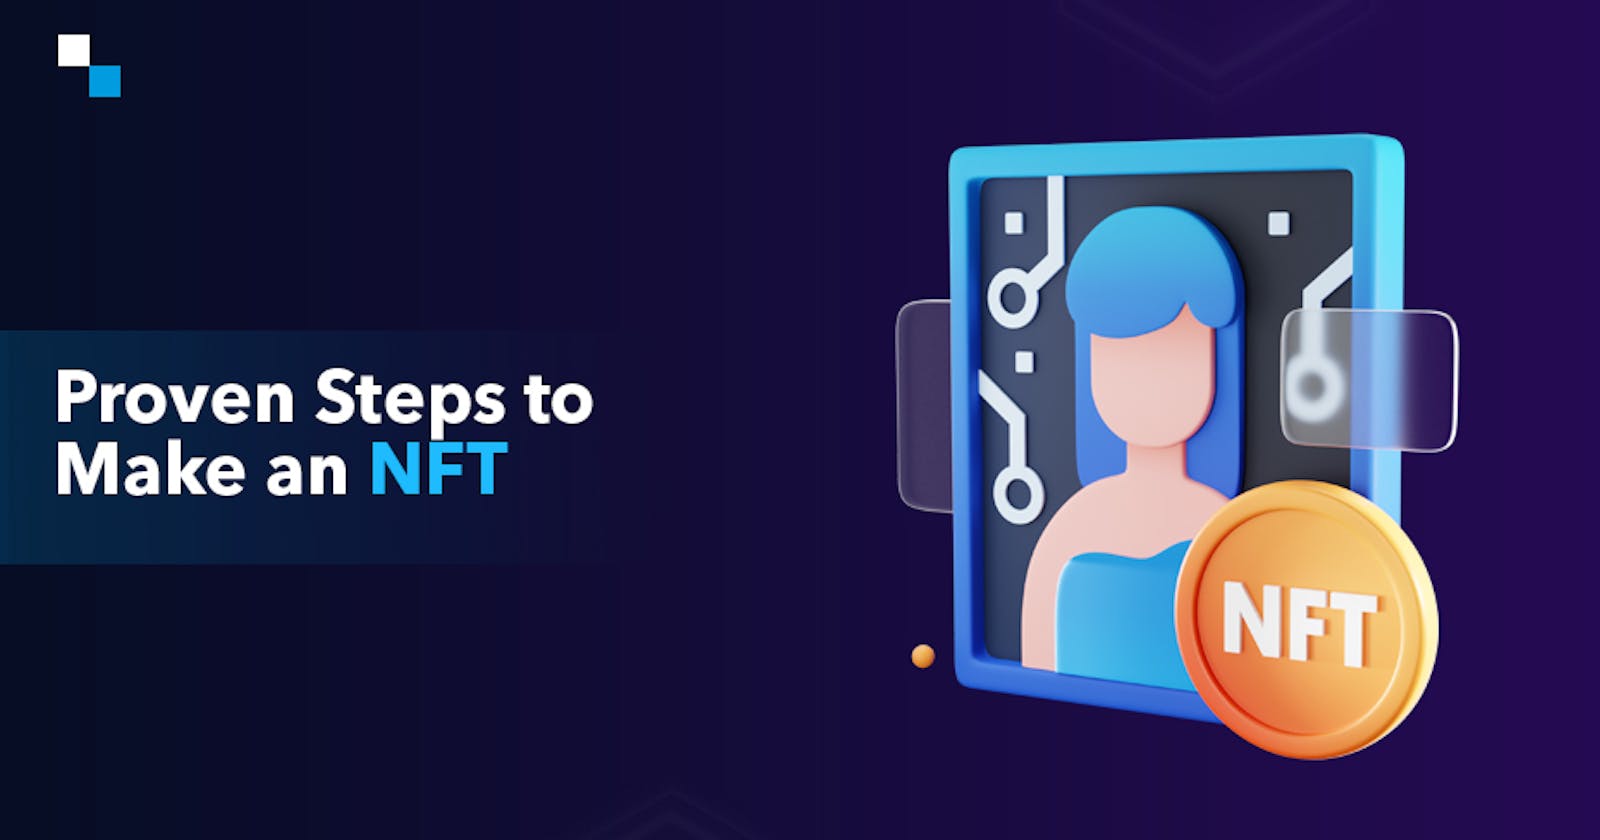 How to Make an NFT in 7 Days